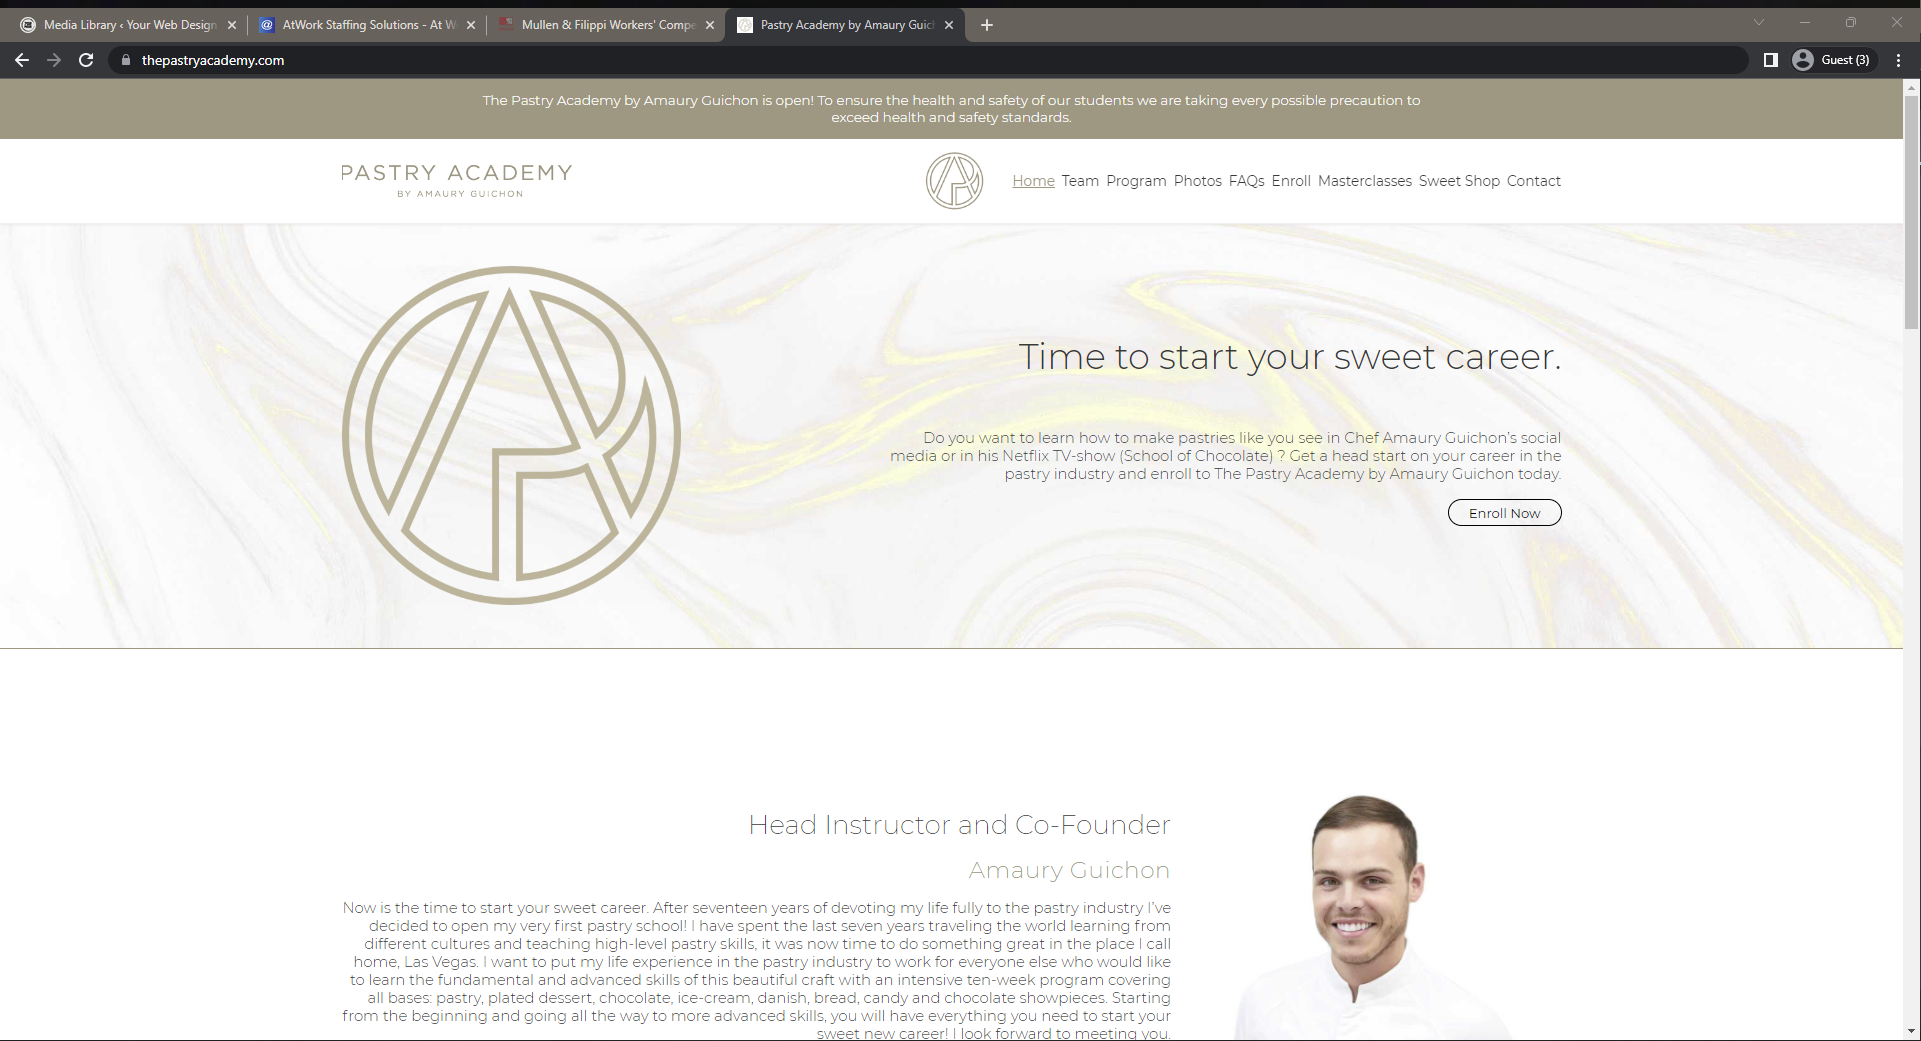 The Pastry Academy Website Design by 702 Pros - PPC North Andover, MA